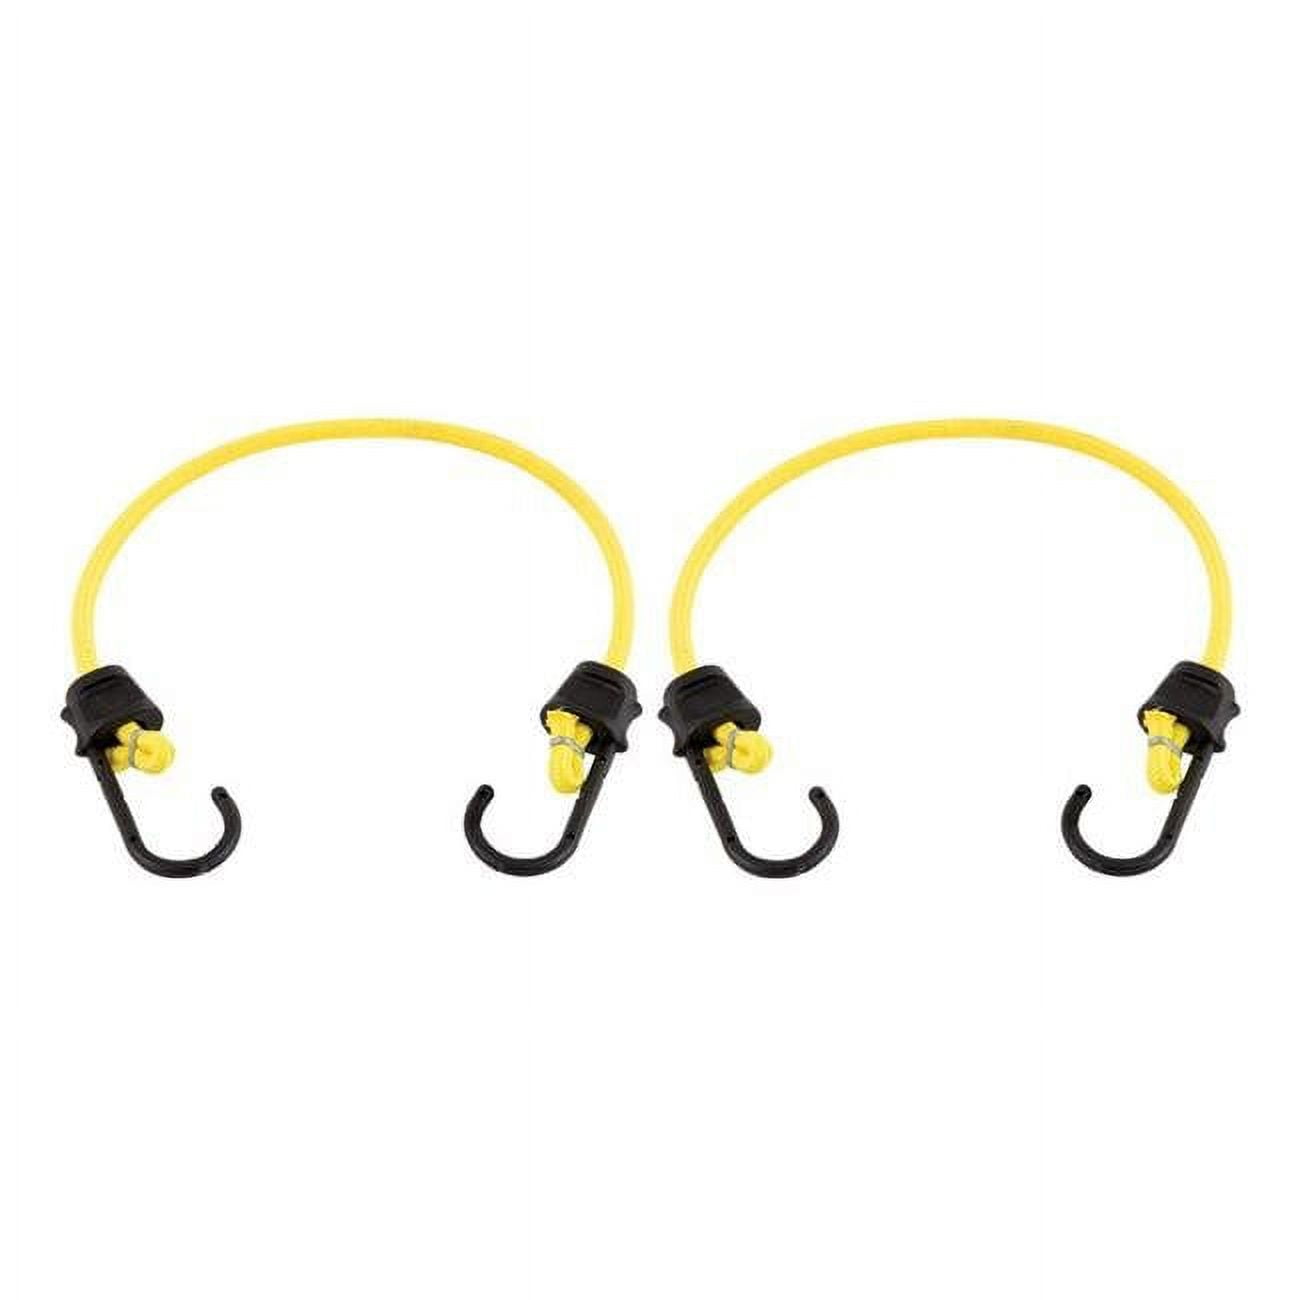 8865172 Yellow Bungee Cord, 24 X 0.315 In. - Pack Of 2